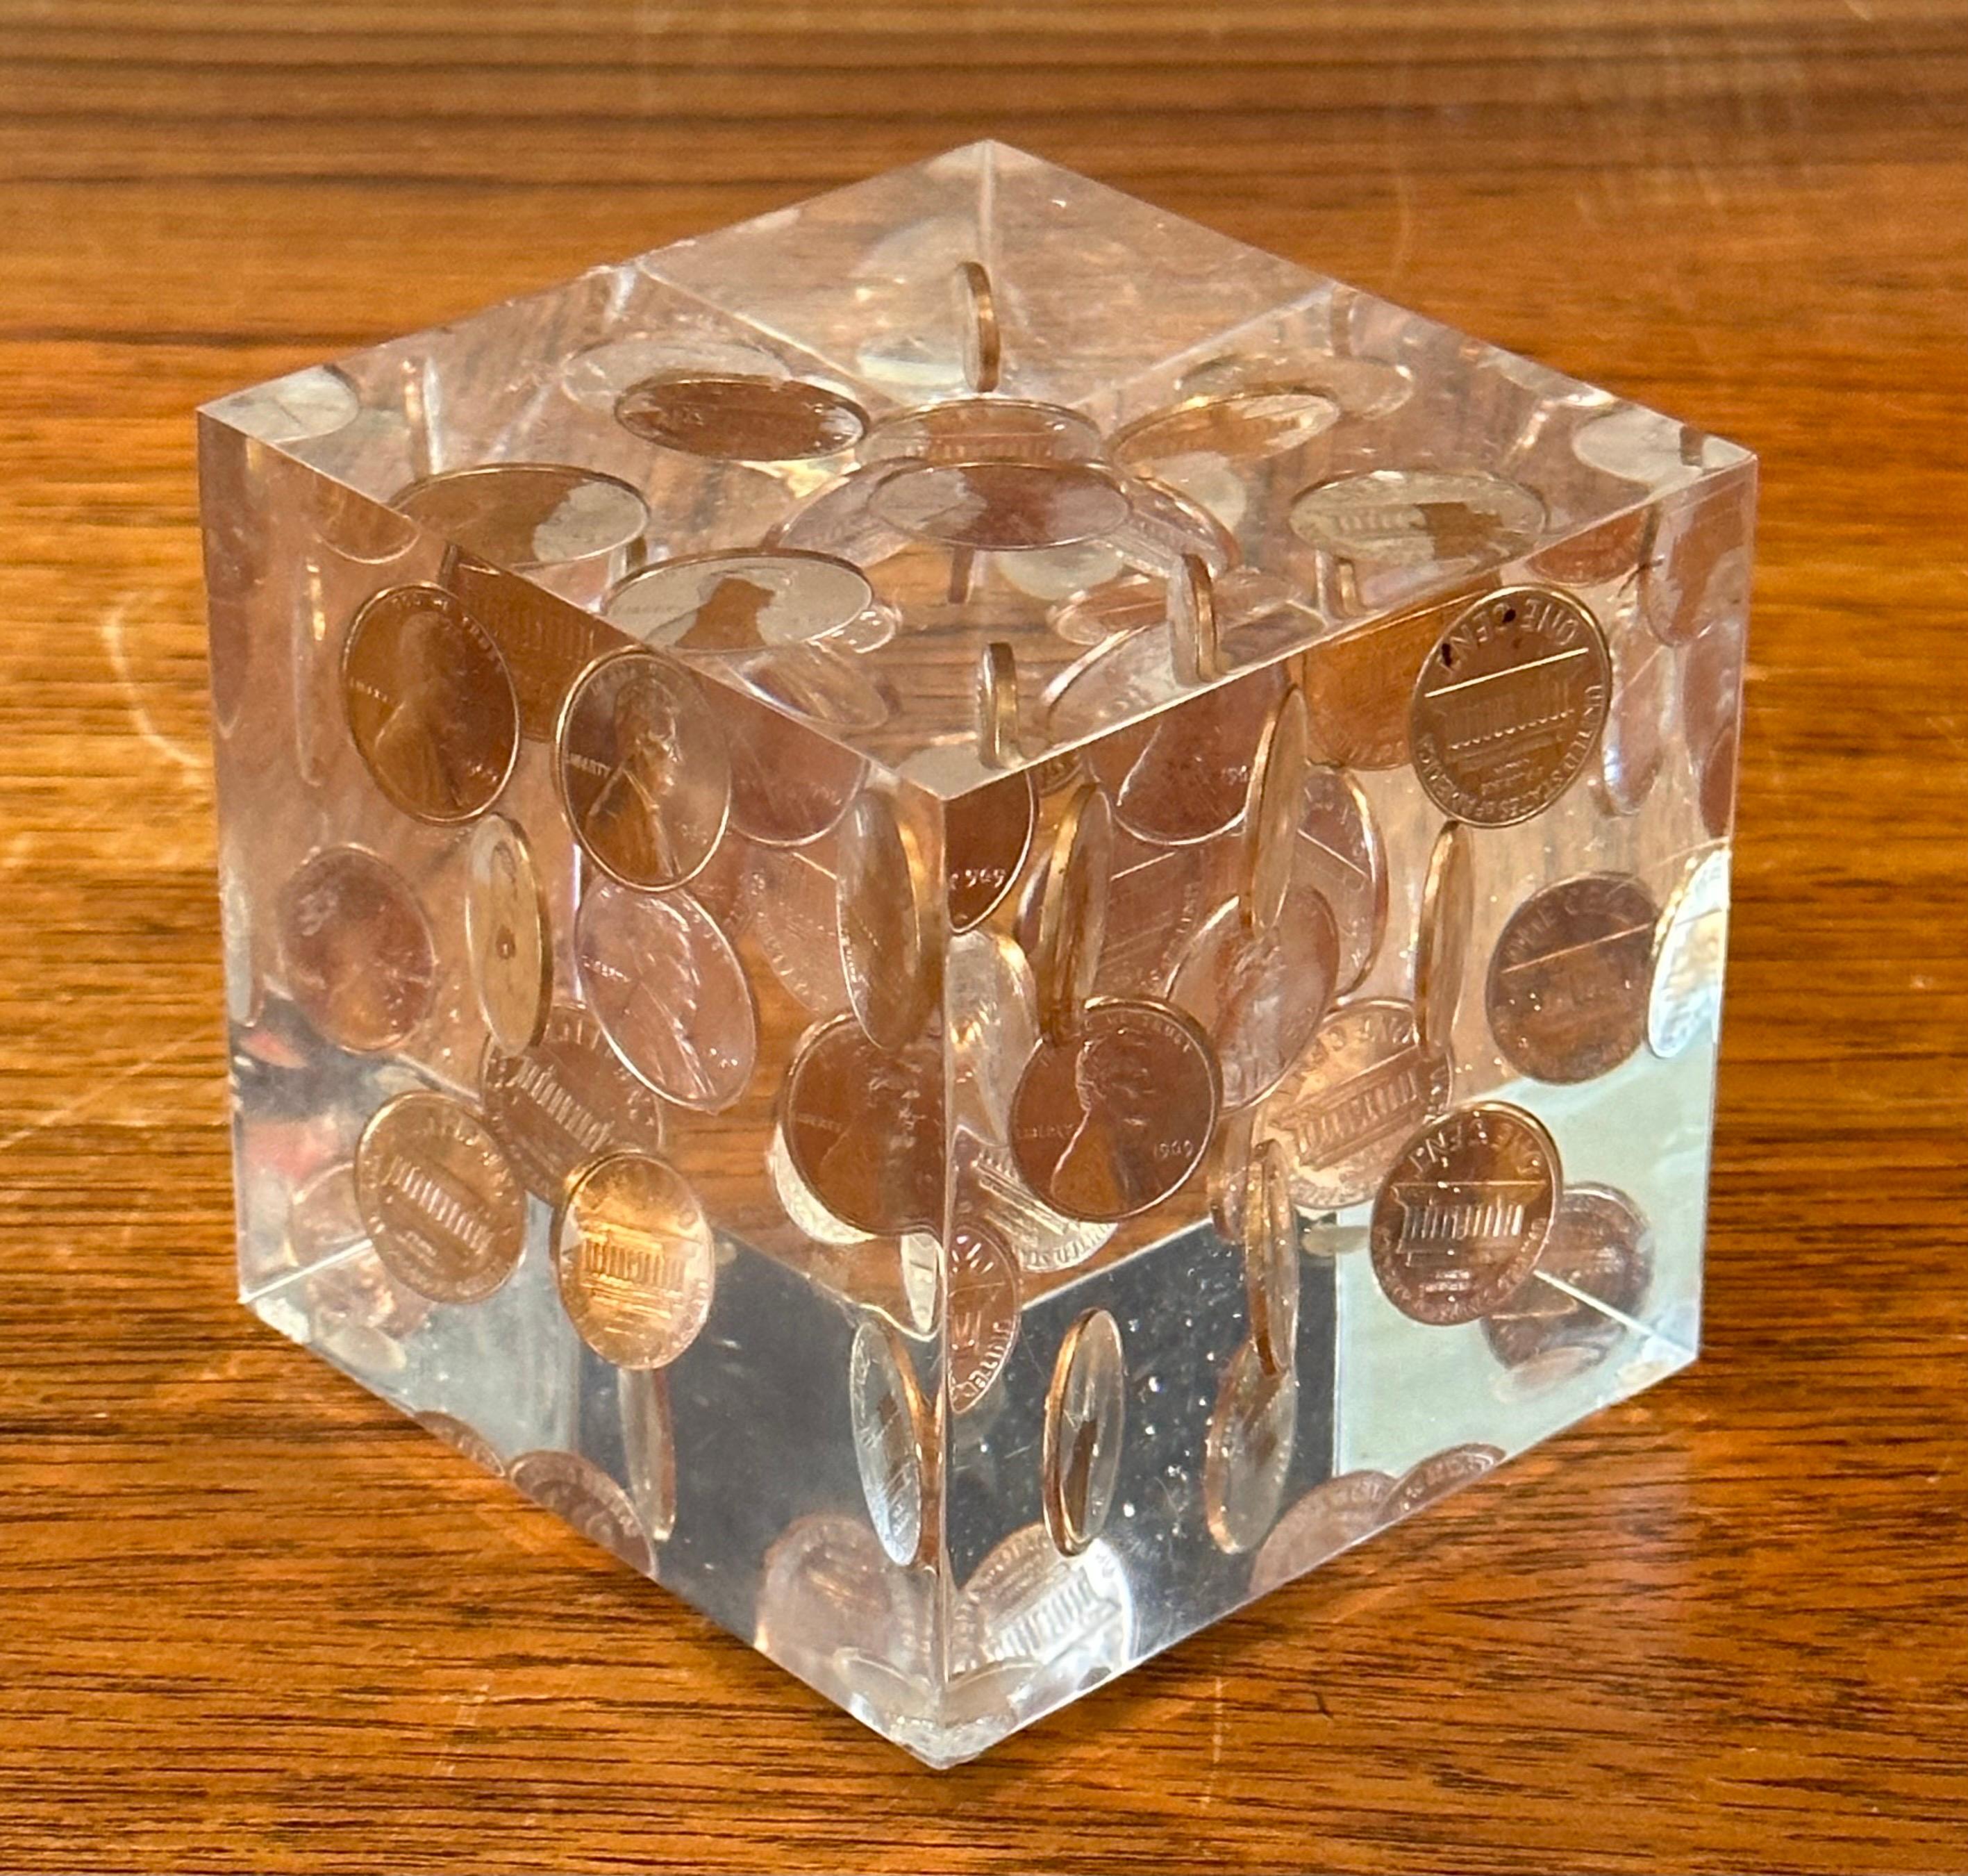 A very cool floating uncirculated 1969 pennies in lucite cube paperweight in the style of William Rolfe, circa 1970s. The piece is in very good vintage condition with no chips or crazing and measures 3.125